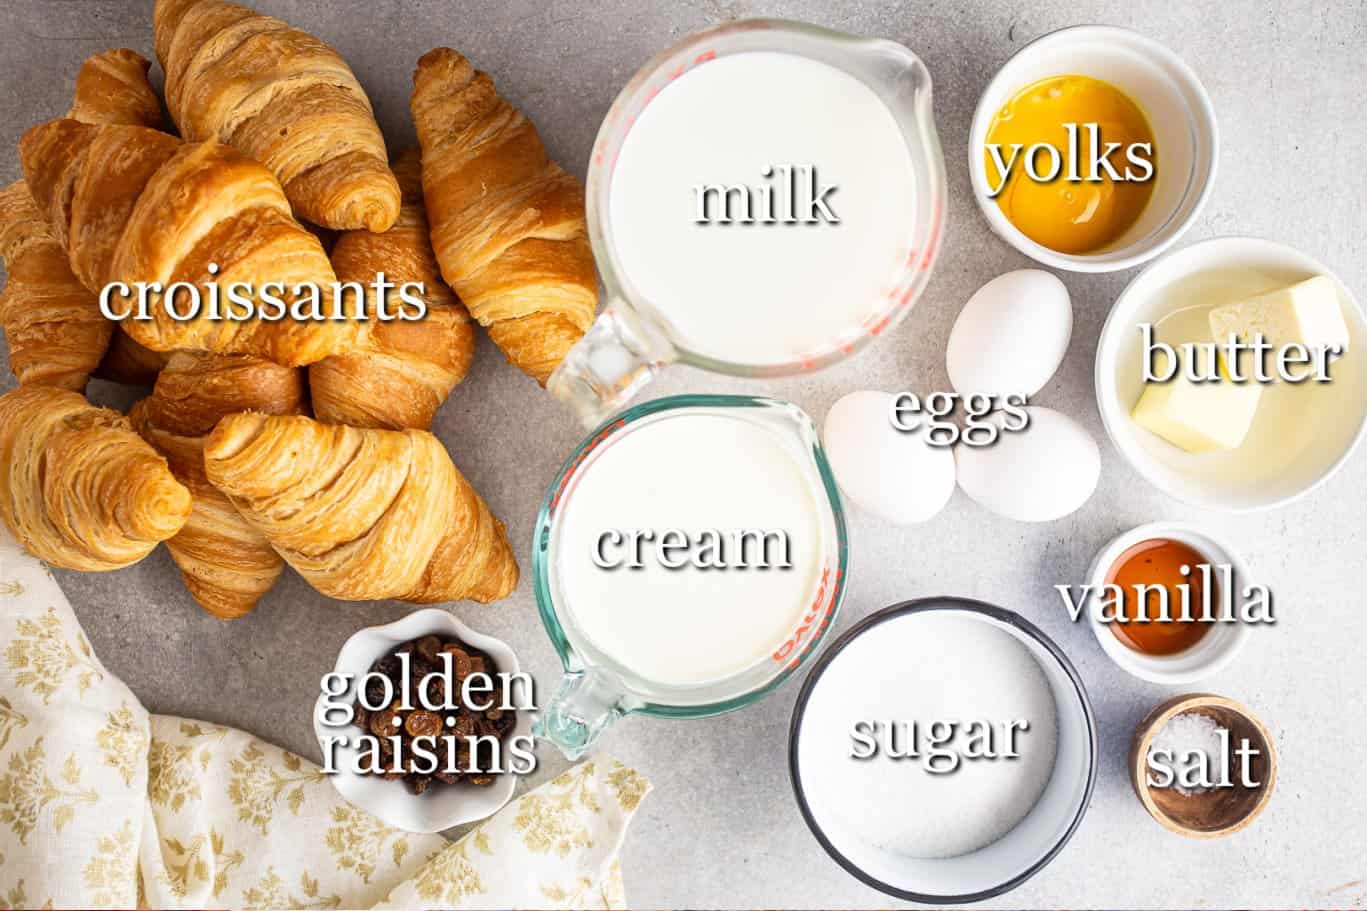 Ingredients for making croissant bread pudding, with text labels.